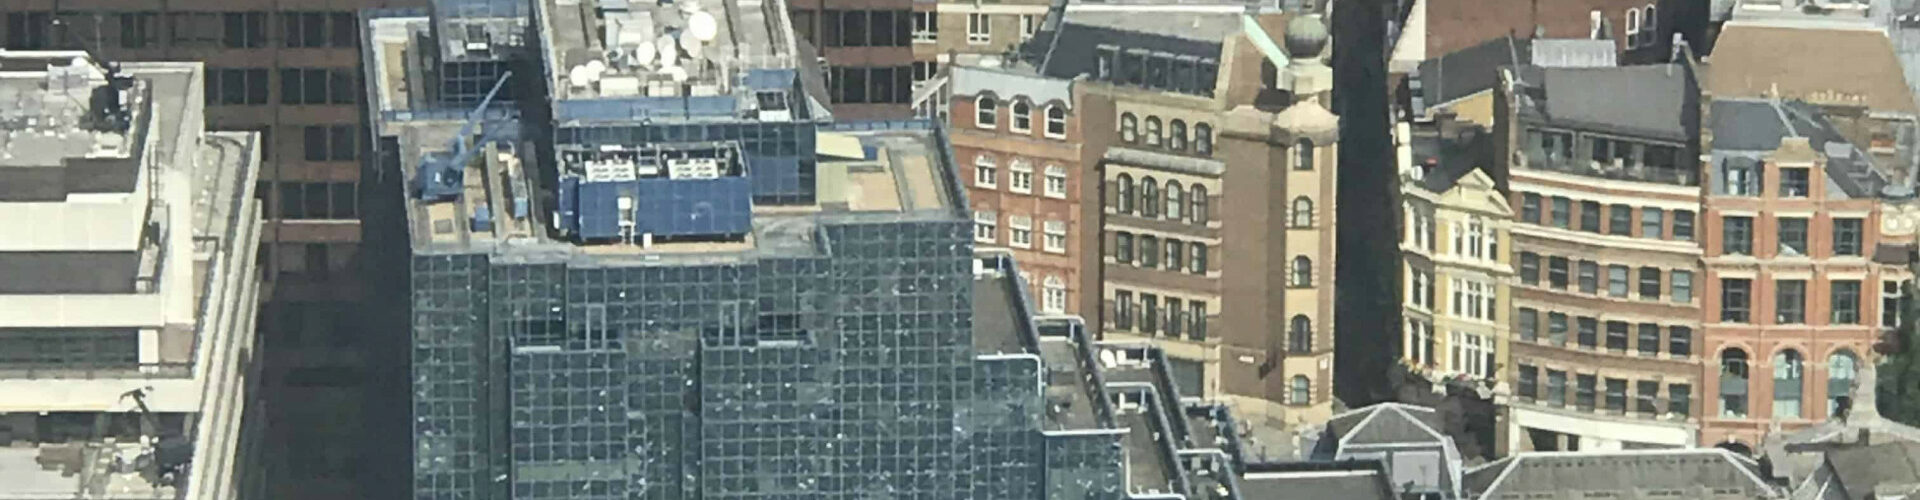 Oakland Care will occupy new offices on the 6th Floor of 10 Lower Thames Street, London, EC3R 6AF from 1st April 2019.